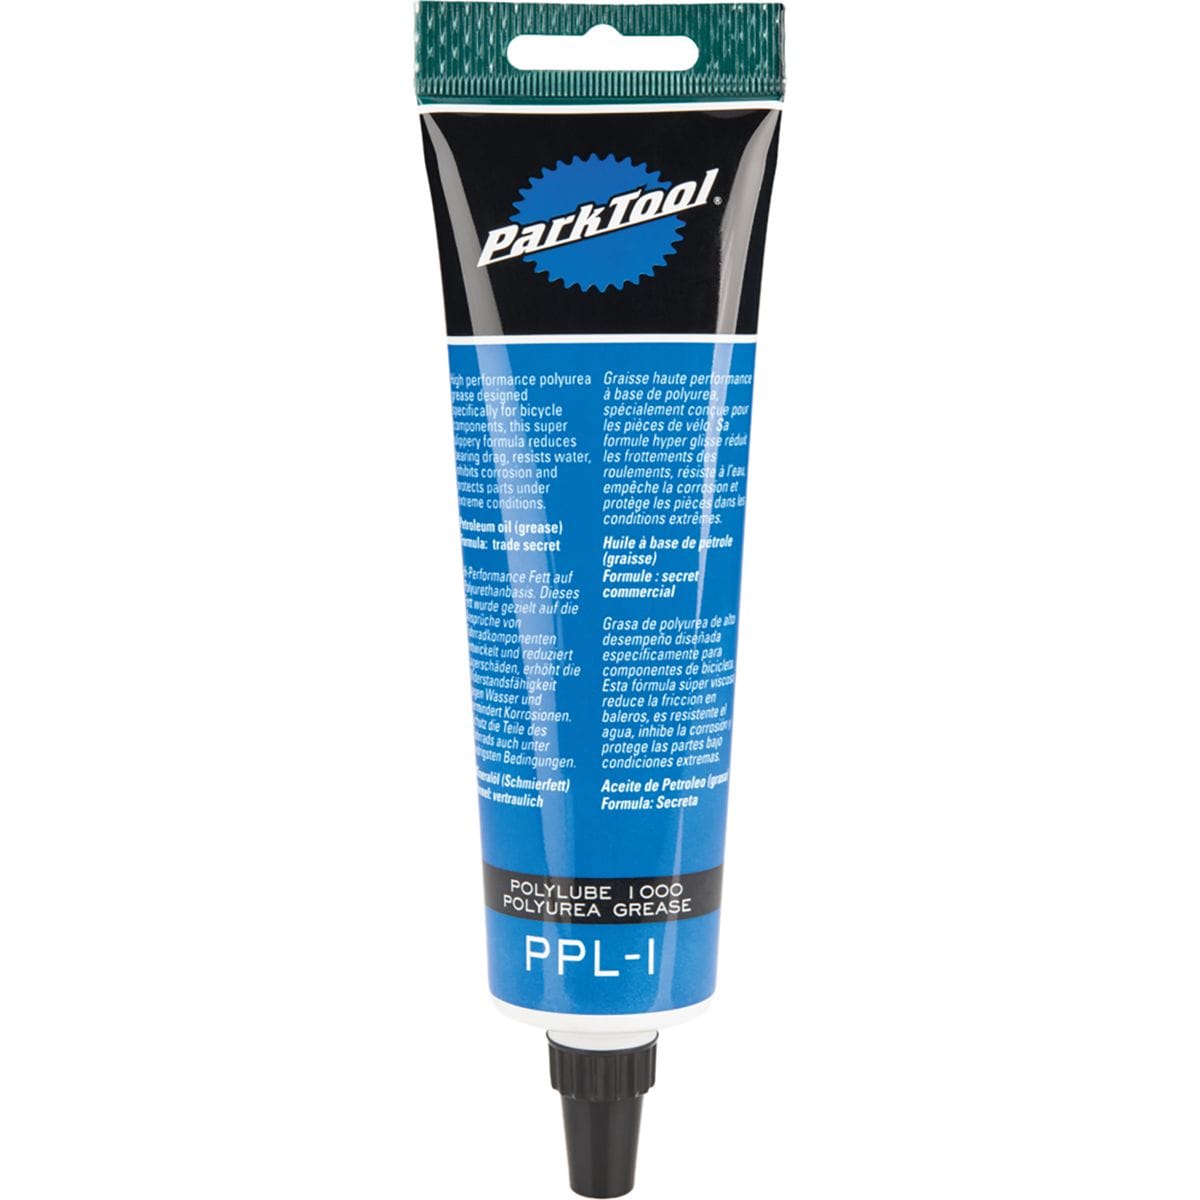 Park Tool PolyLube 1000 Grease PPL 1